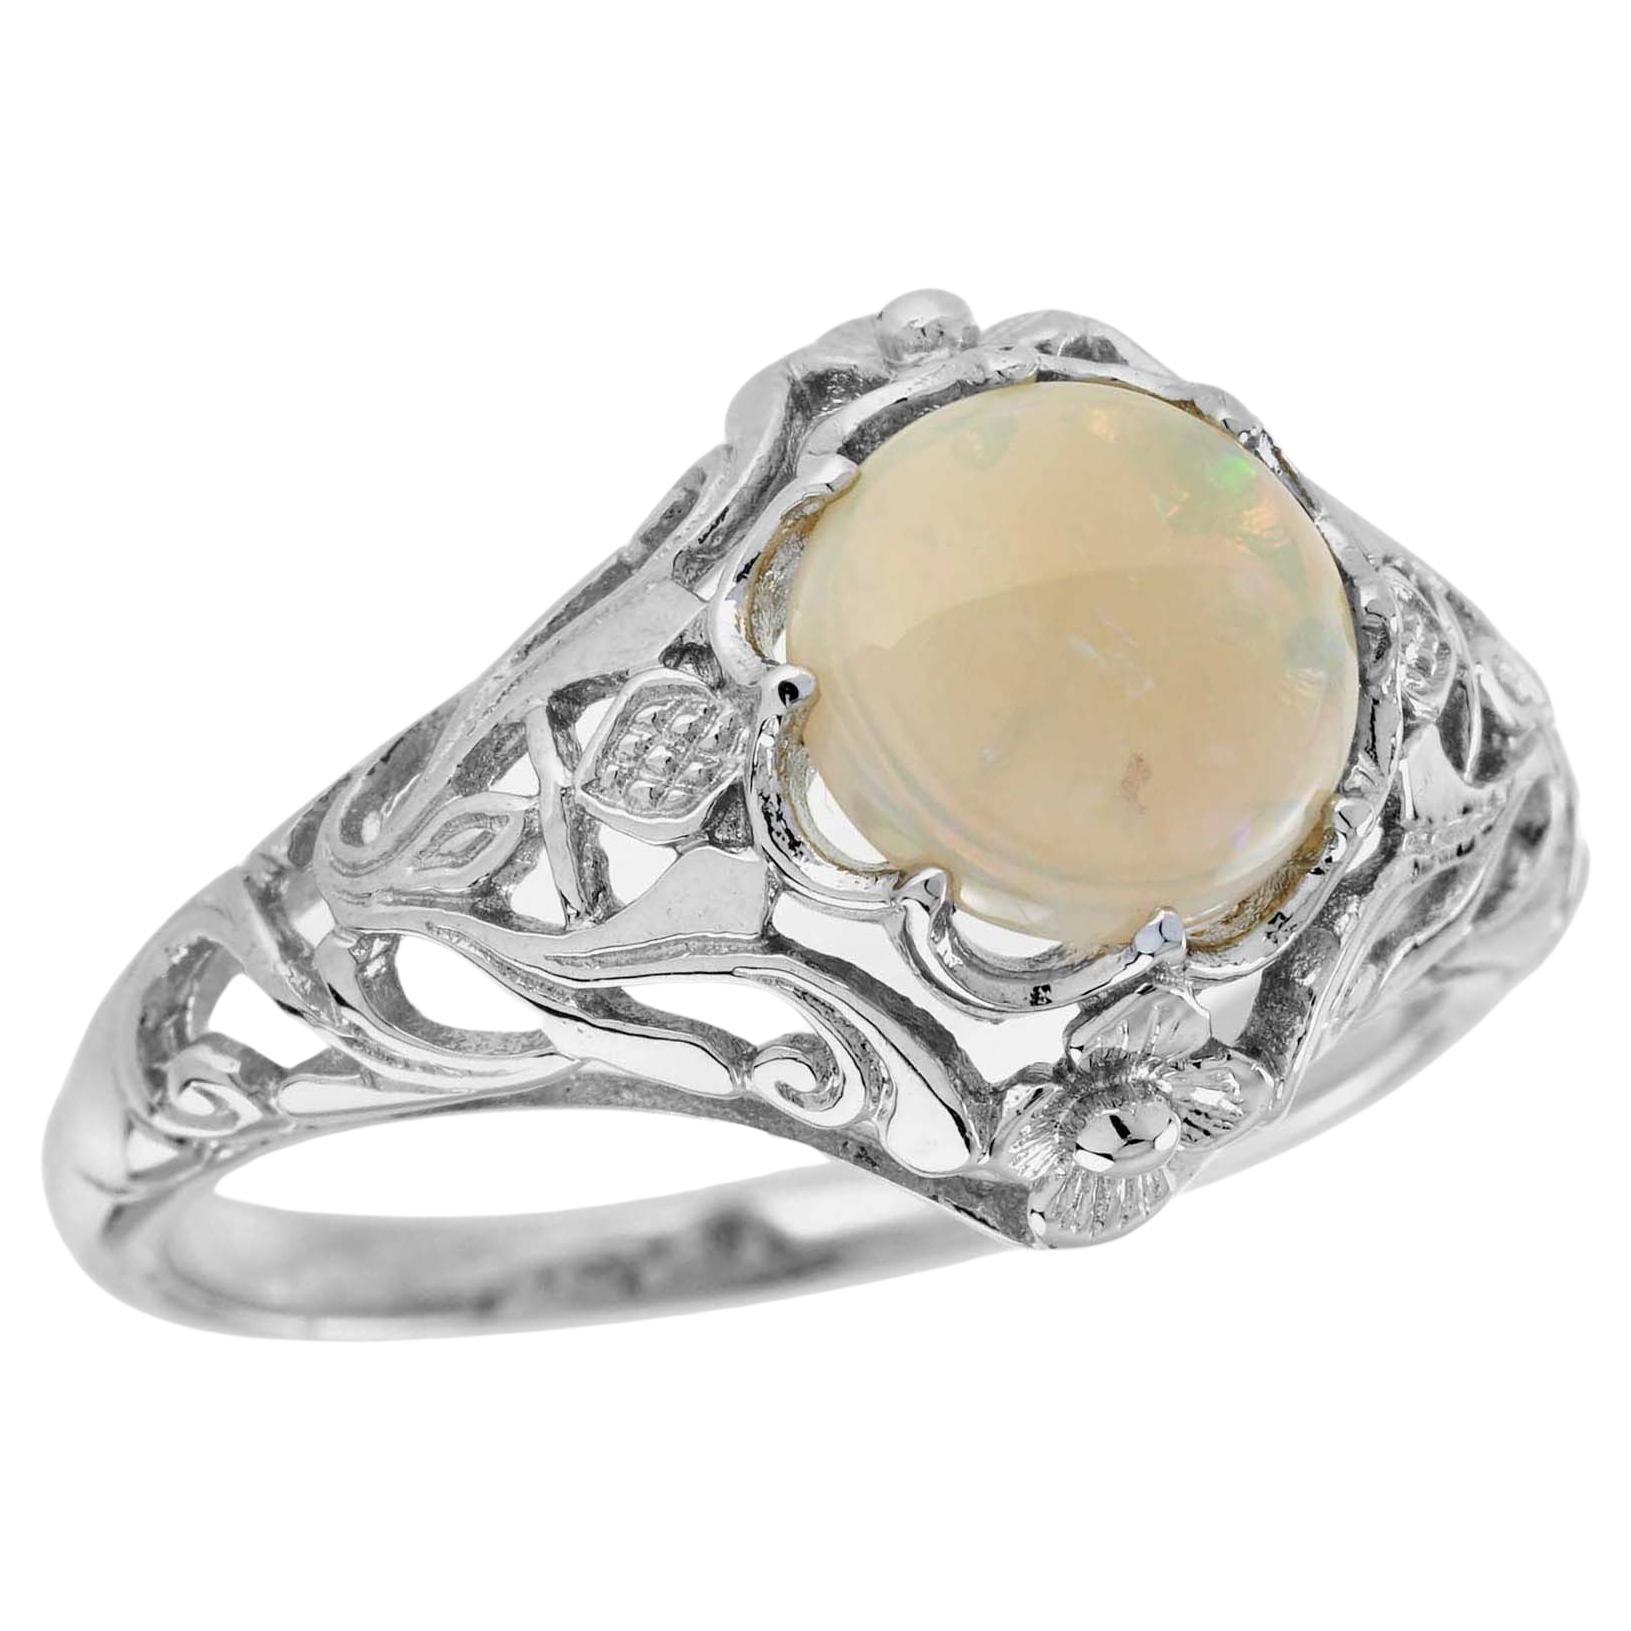 For Sale:  Natural Opal Vintage Style Filigree Solitaire Ring in Solid 9K White Gold